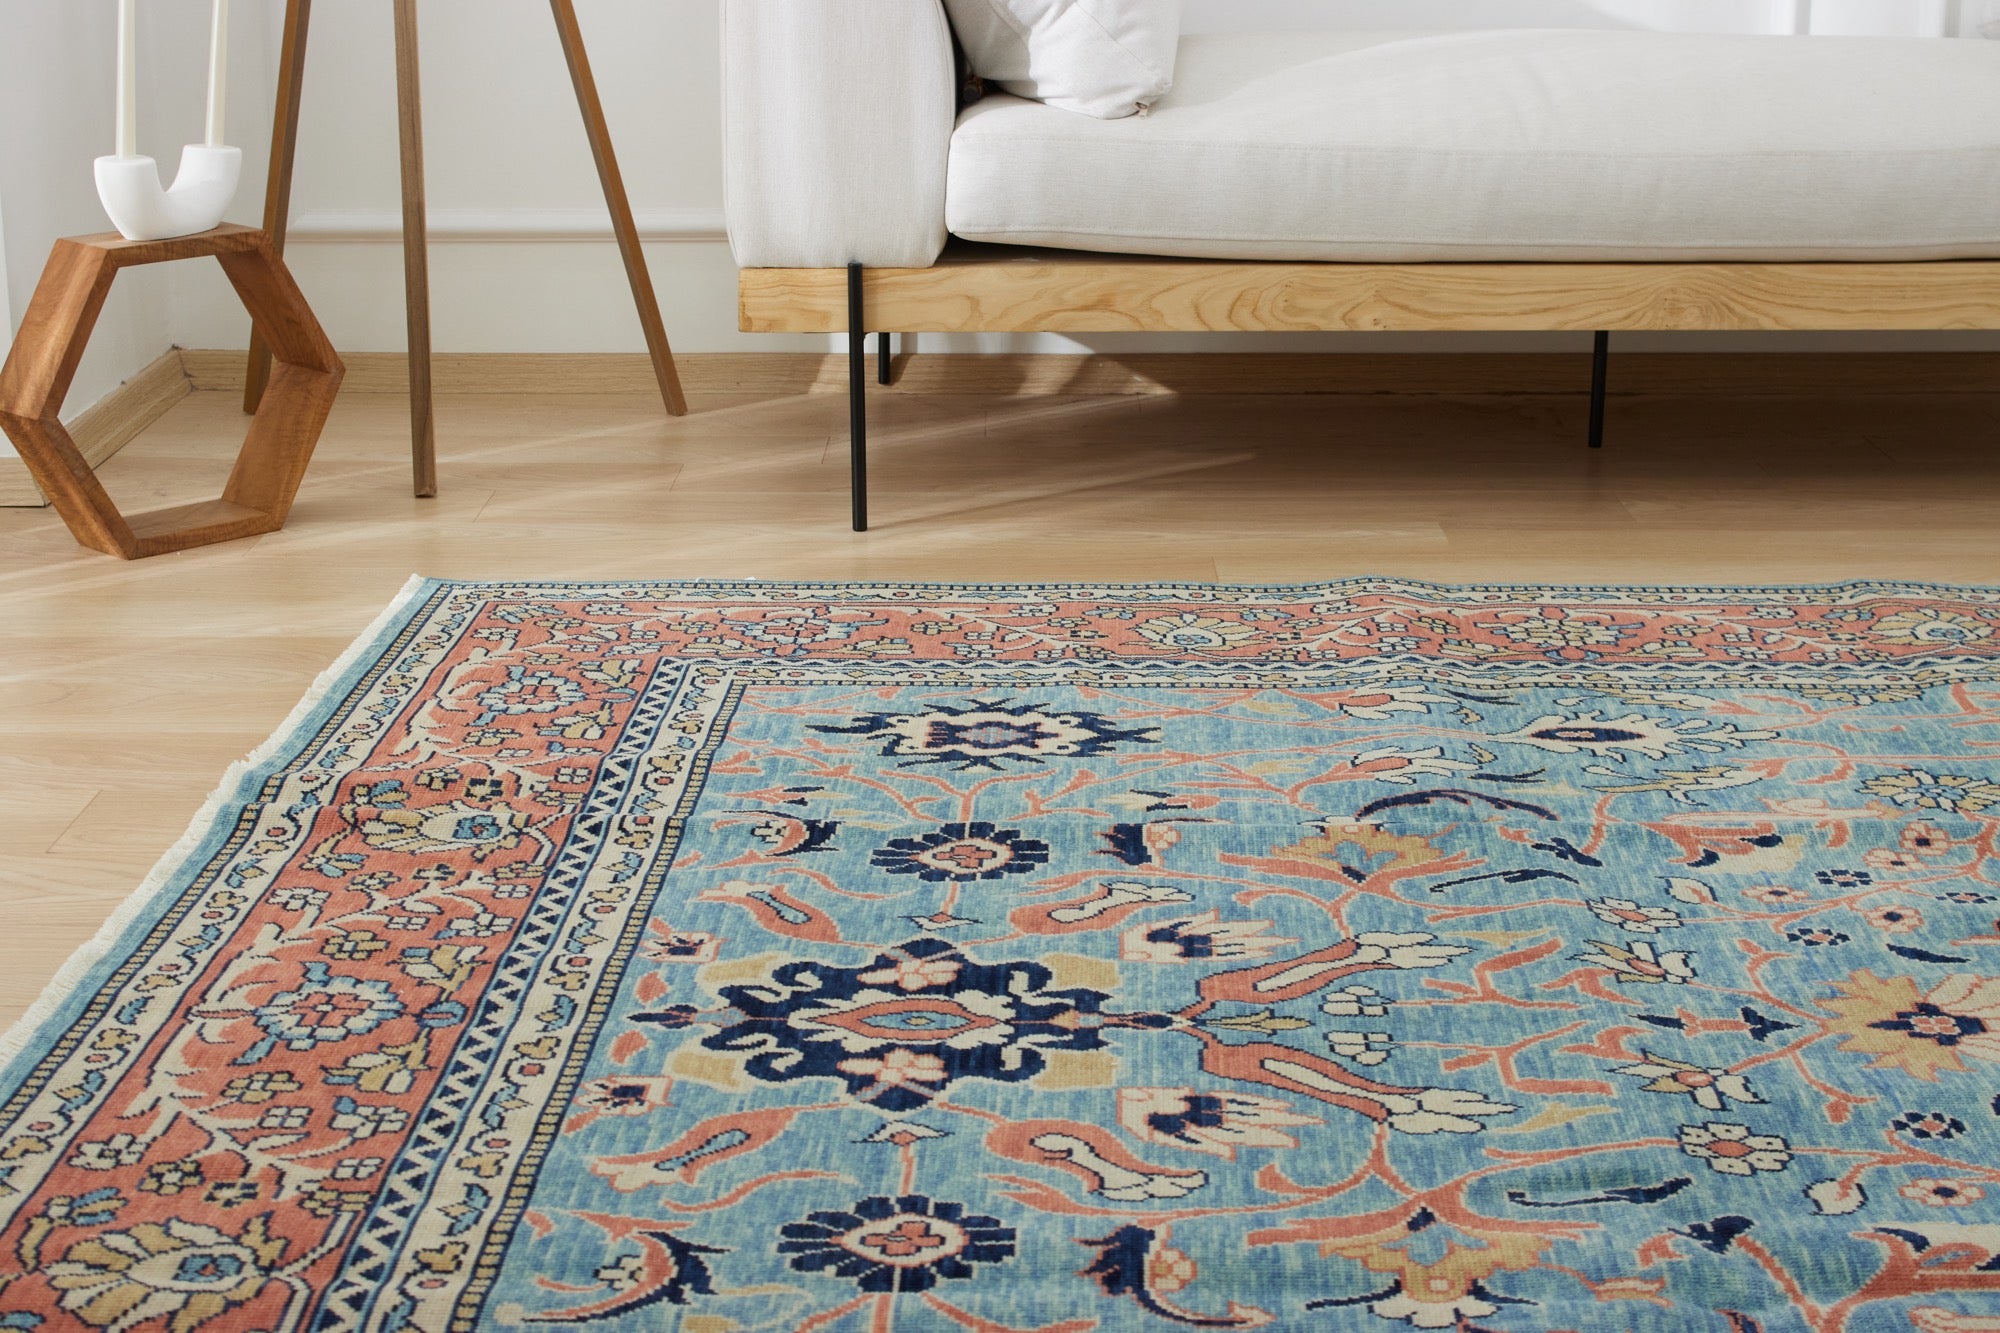 Kemply | Unique Allover Pattern Elegance | Kuden Rugs